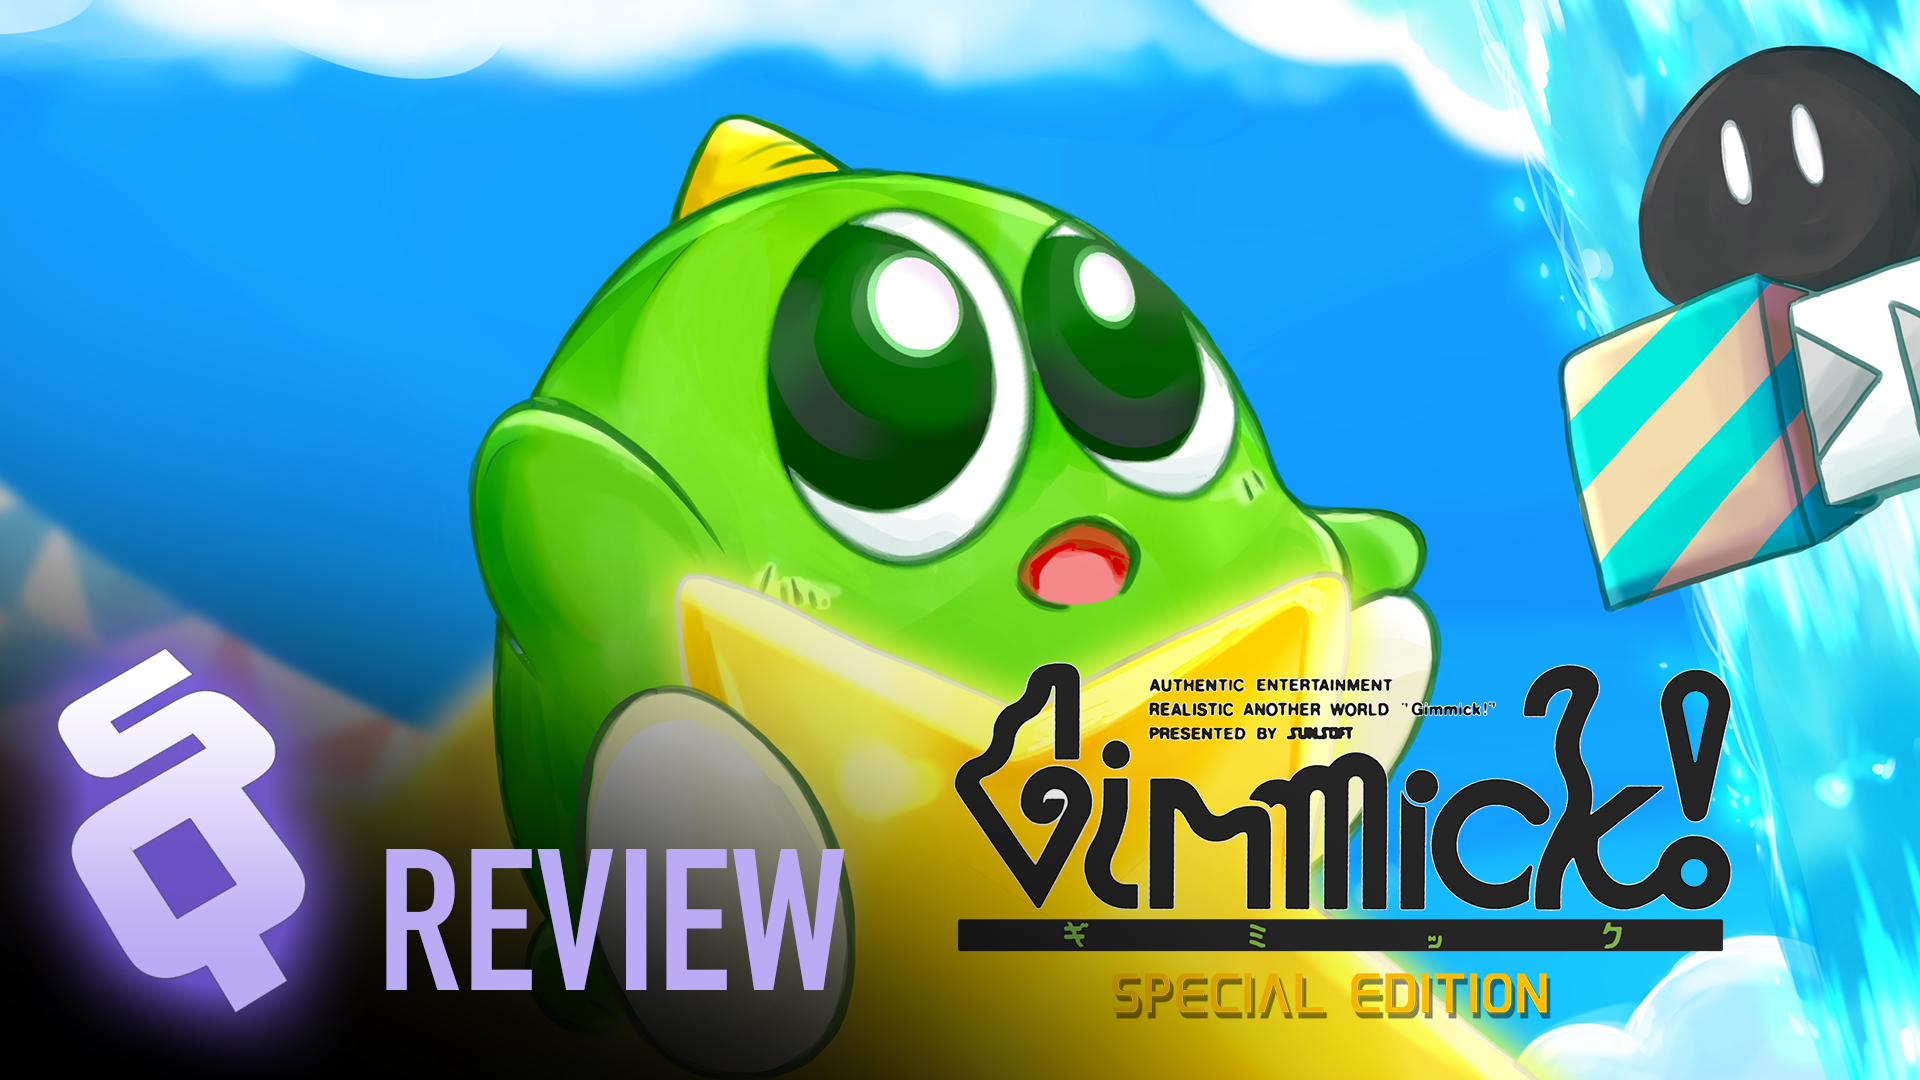 Gimmick! Special Edition review